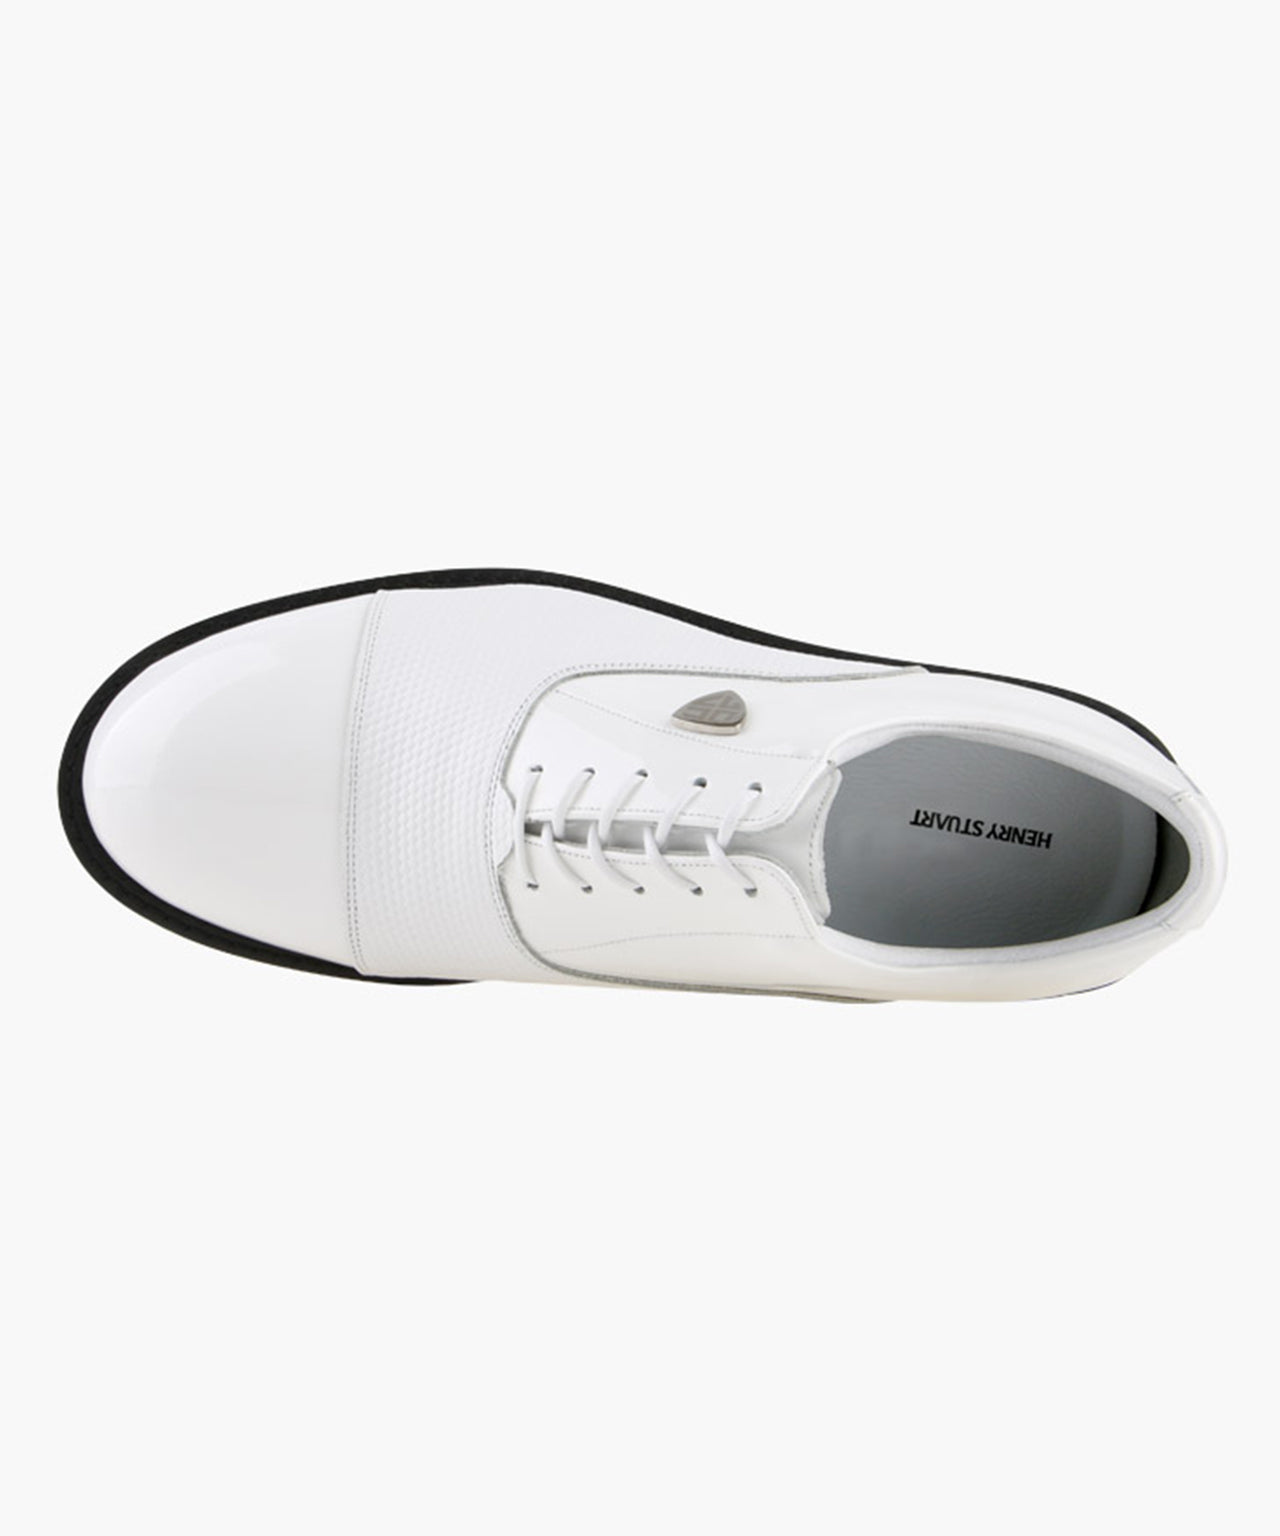 HENRY STUART Icon Spikeless Golf Shoes - White